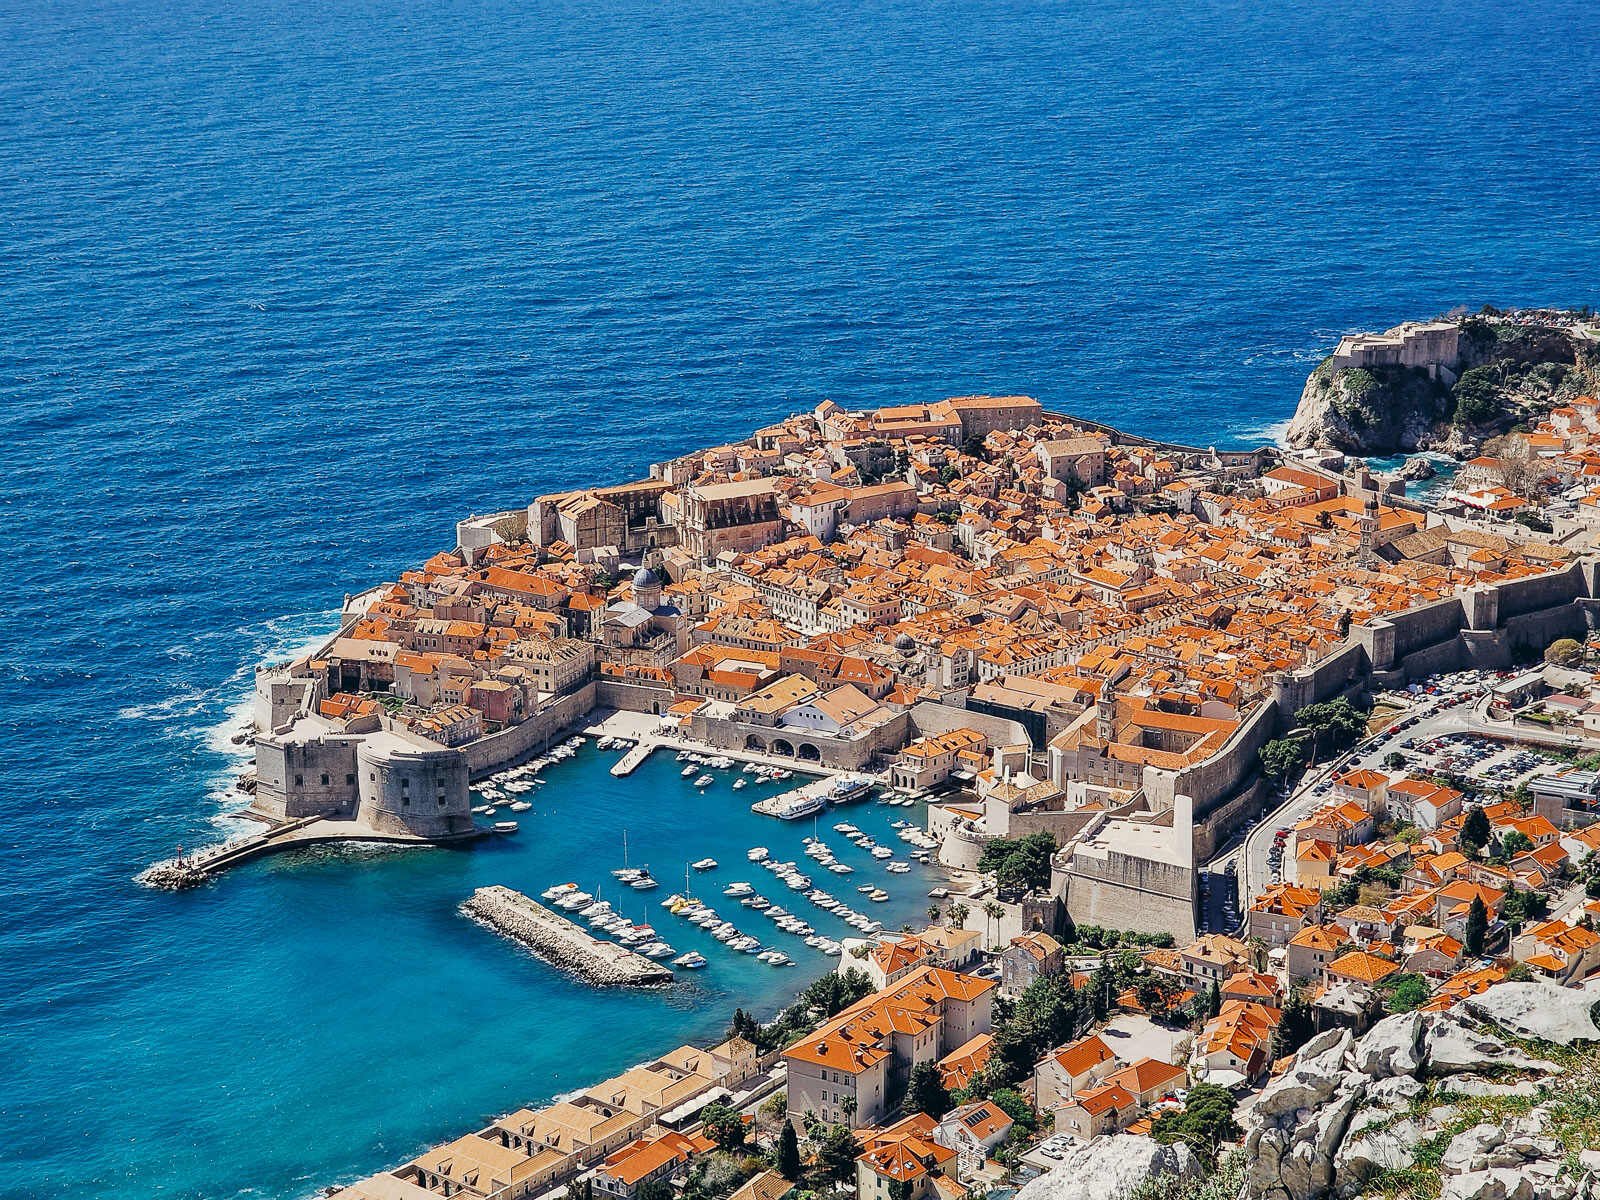 the ancient walled town of Dubrovnik Croatia